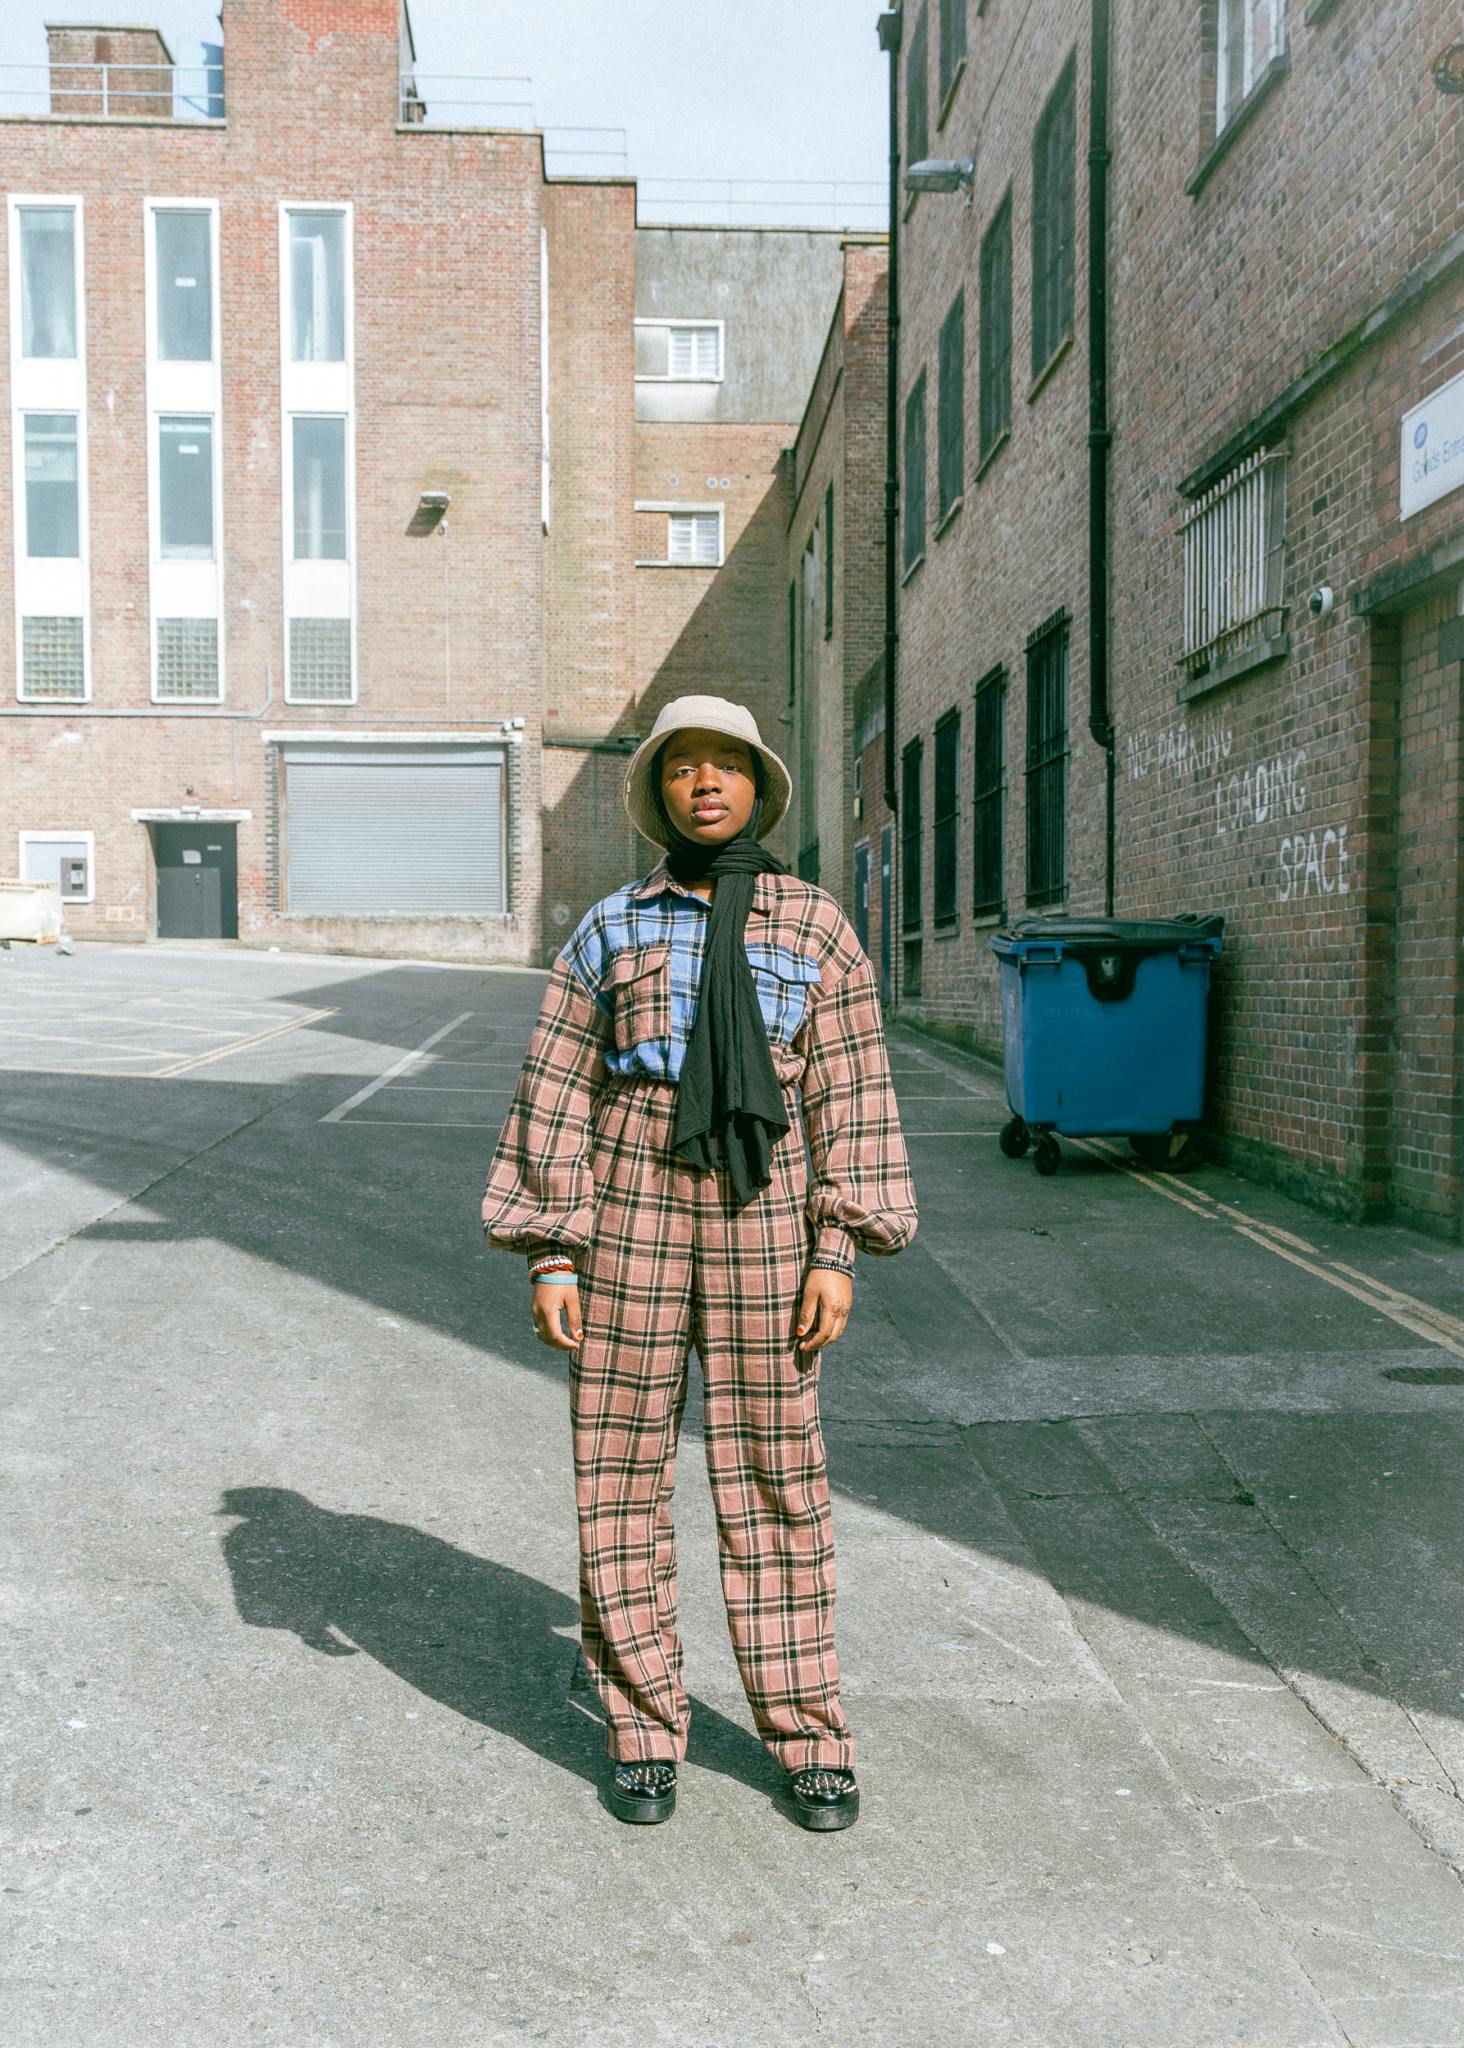 Image shows a woman stood in the middle of a street, with brick buildings around her. She is dressed in a checkered suit and bucket hat and looking directly at the camera.